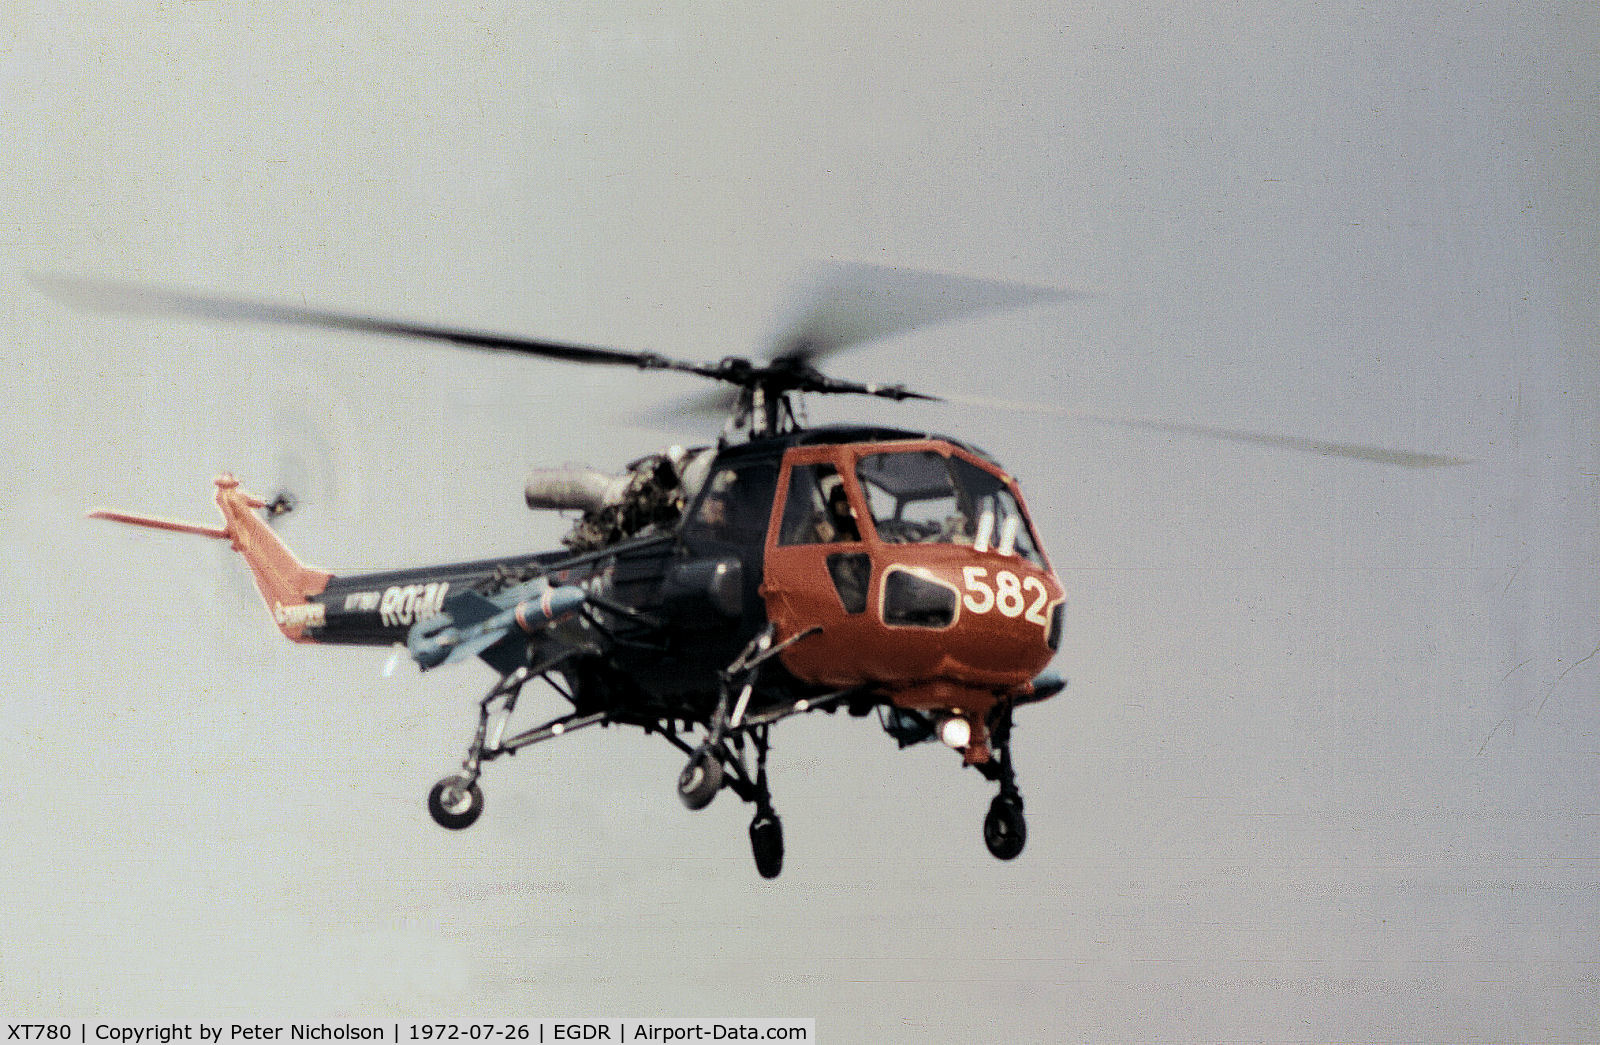 XT780, Westland Wasp HAS.1 C/N F9662, Wasp HAS.1 of 706 Squadron in action at the 1972 RNAS Culdrose Airshow.